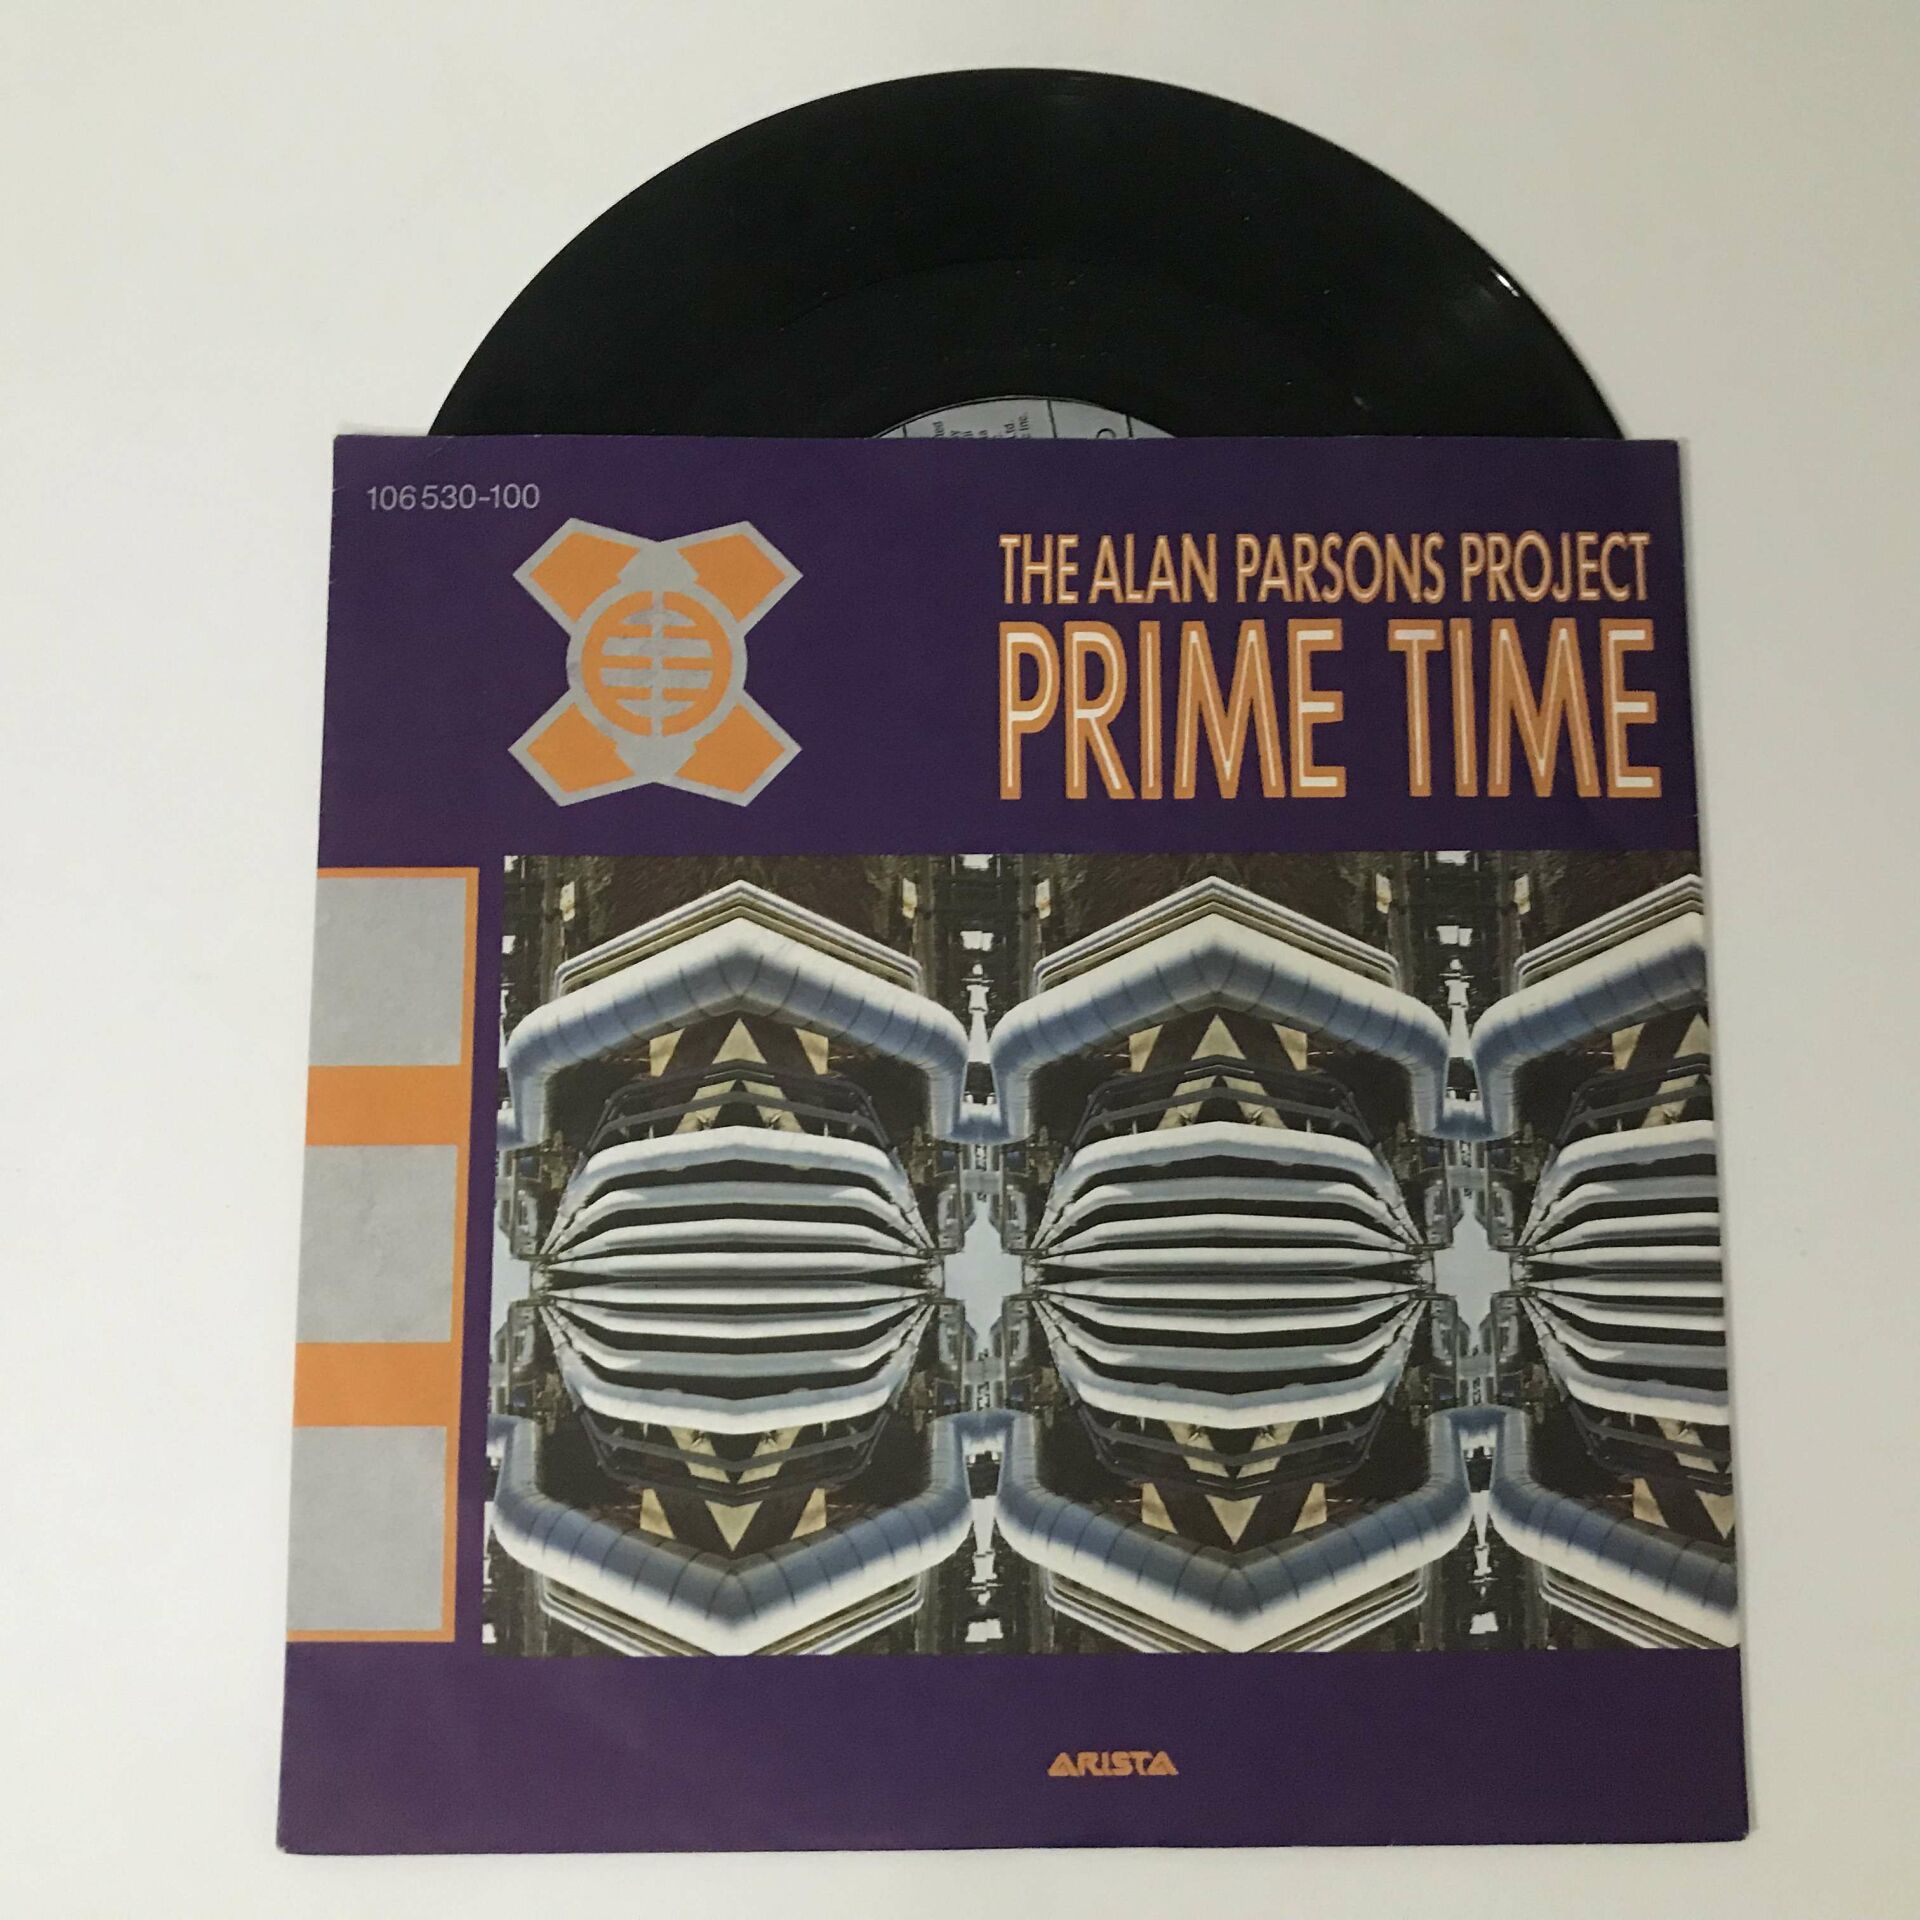 The Alan Parsons Project – Prime Time